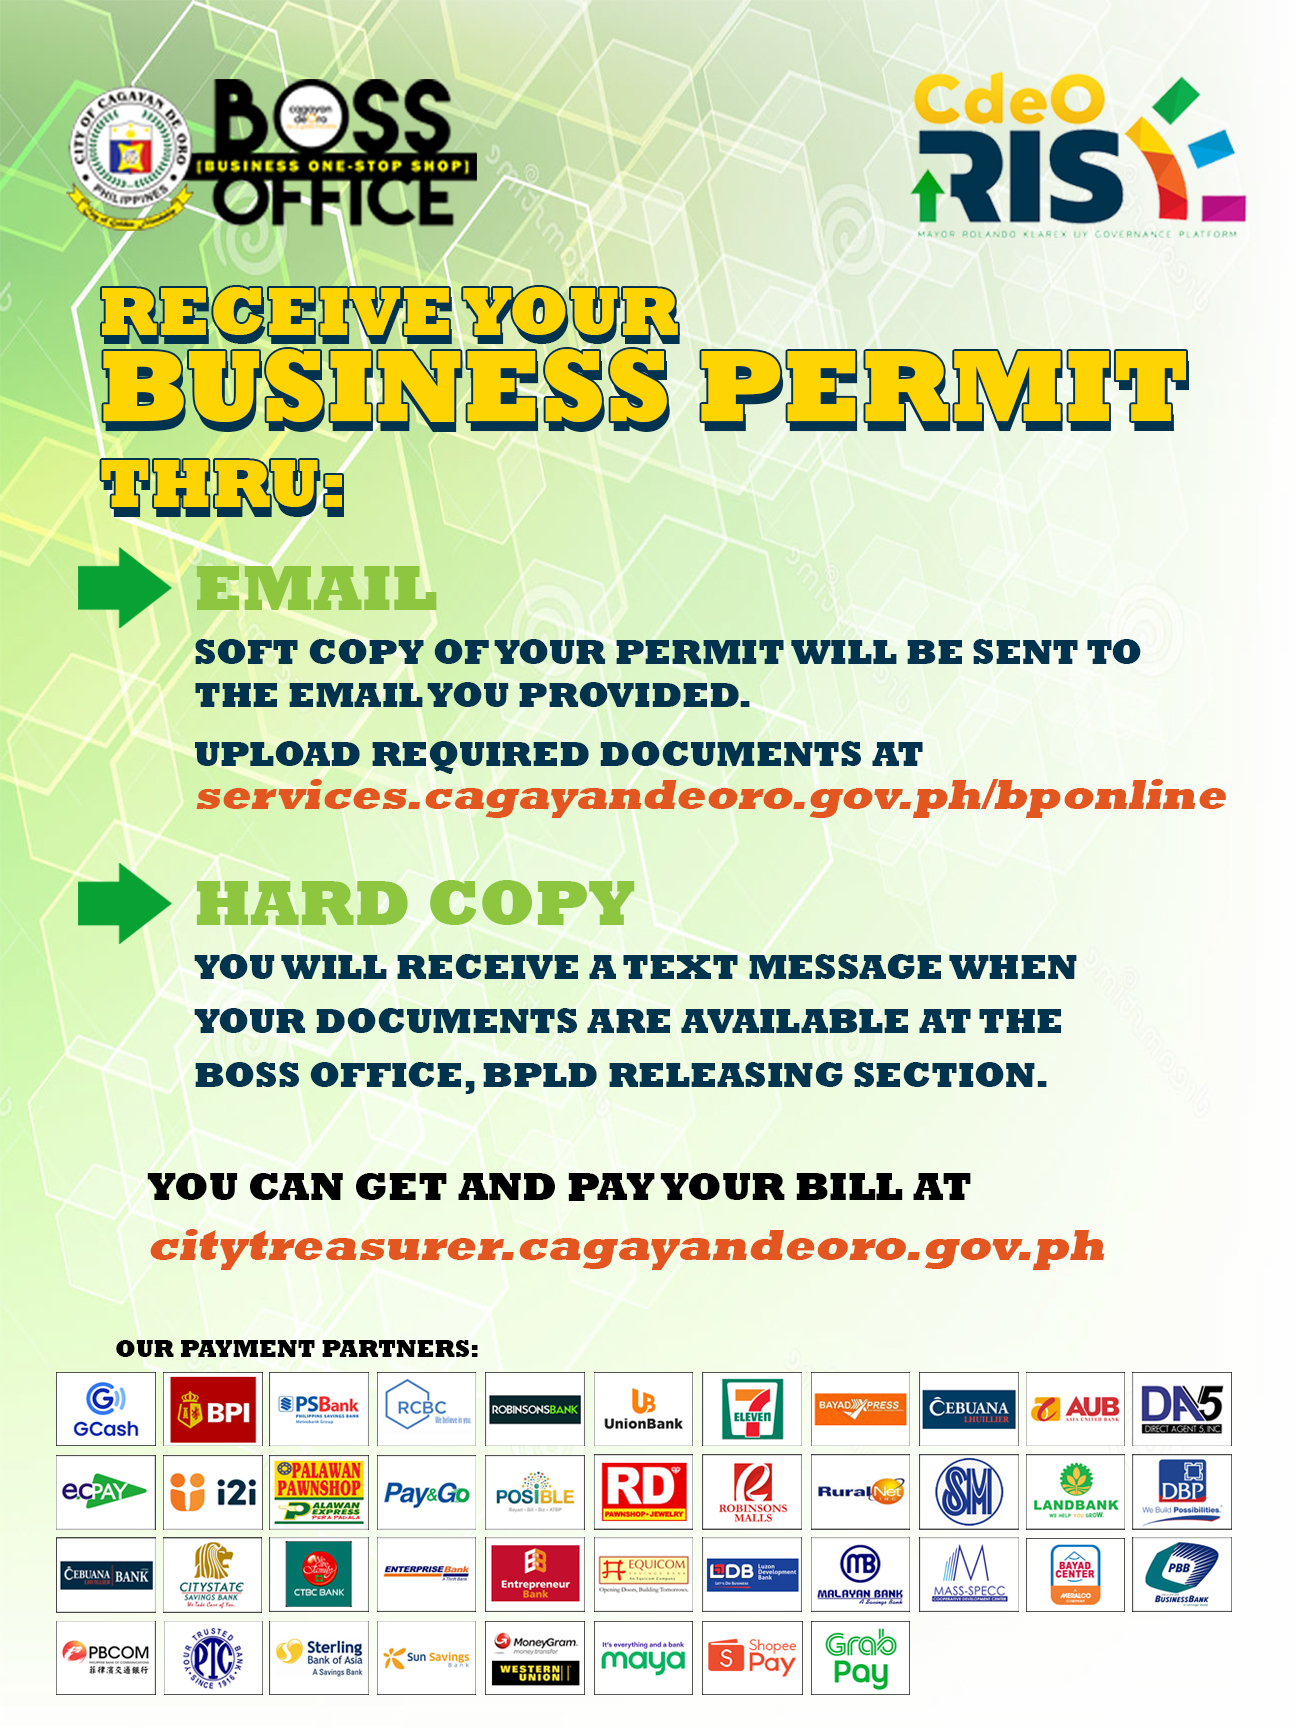 Get your bill and pay online